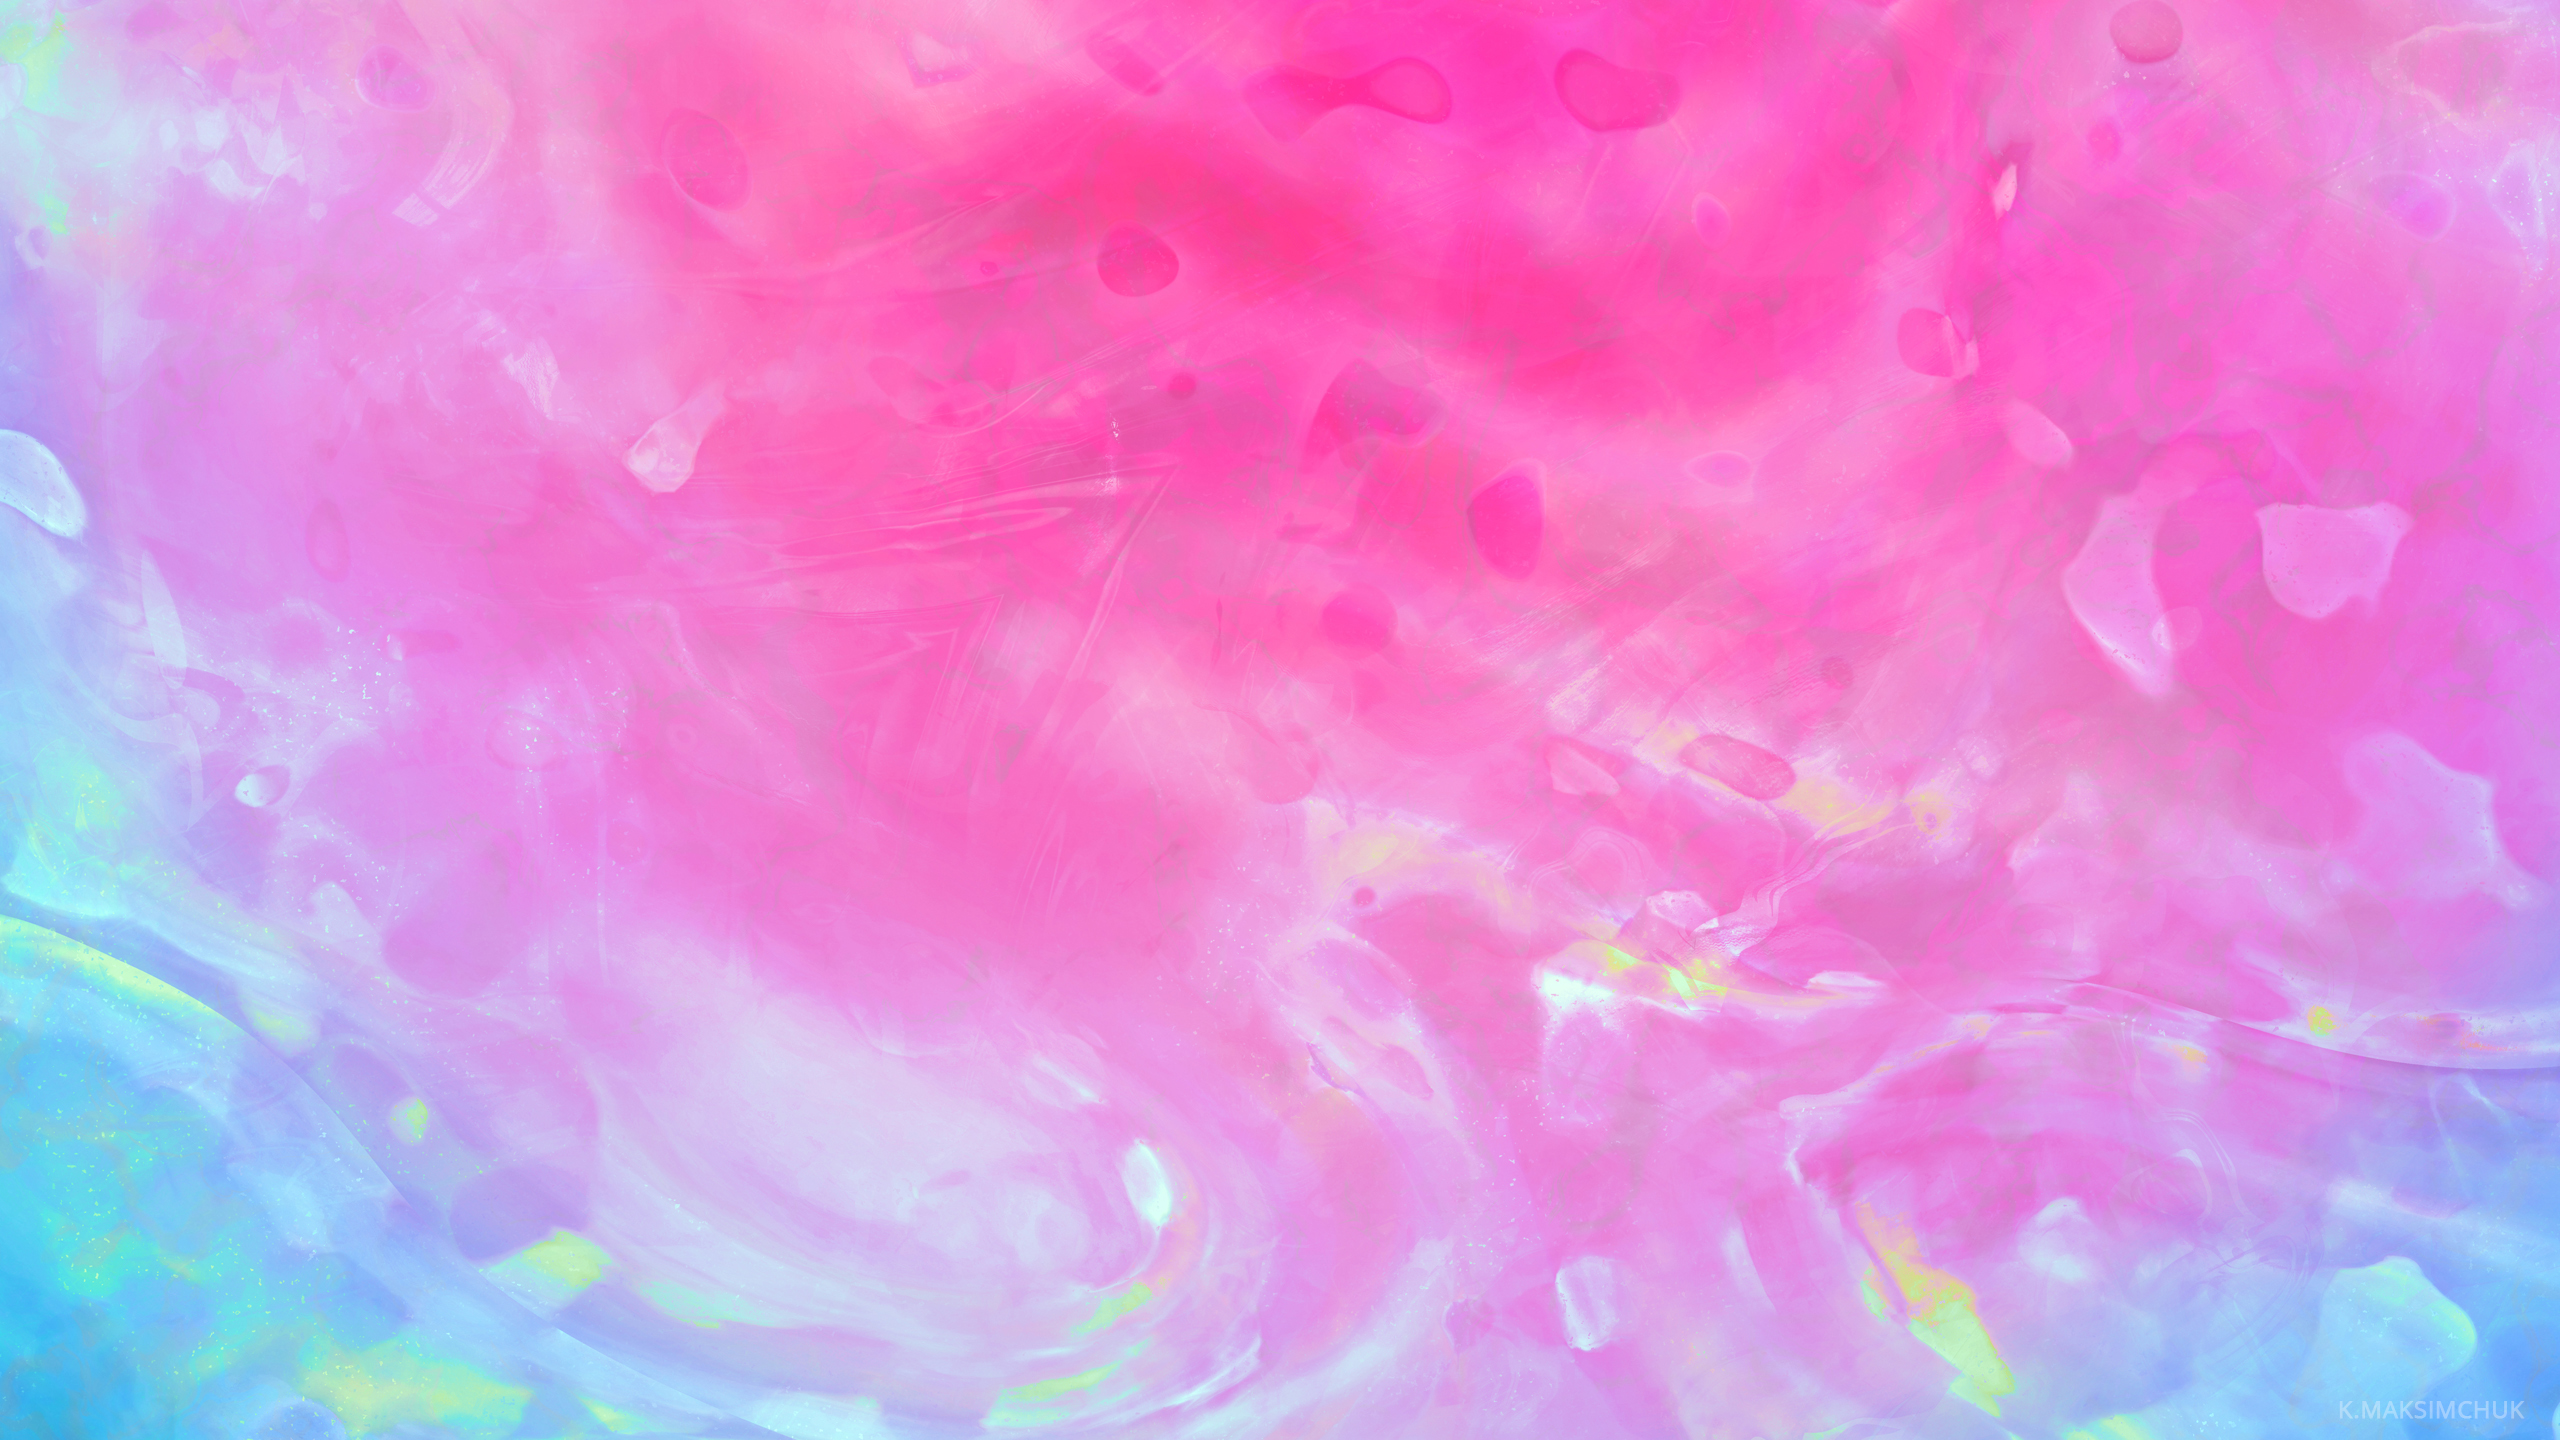 Wallpaper Waves, Spectral, Pink, Gradient, Fluid, HD, Abstract